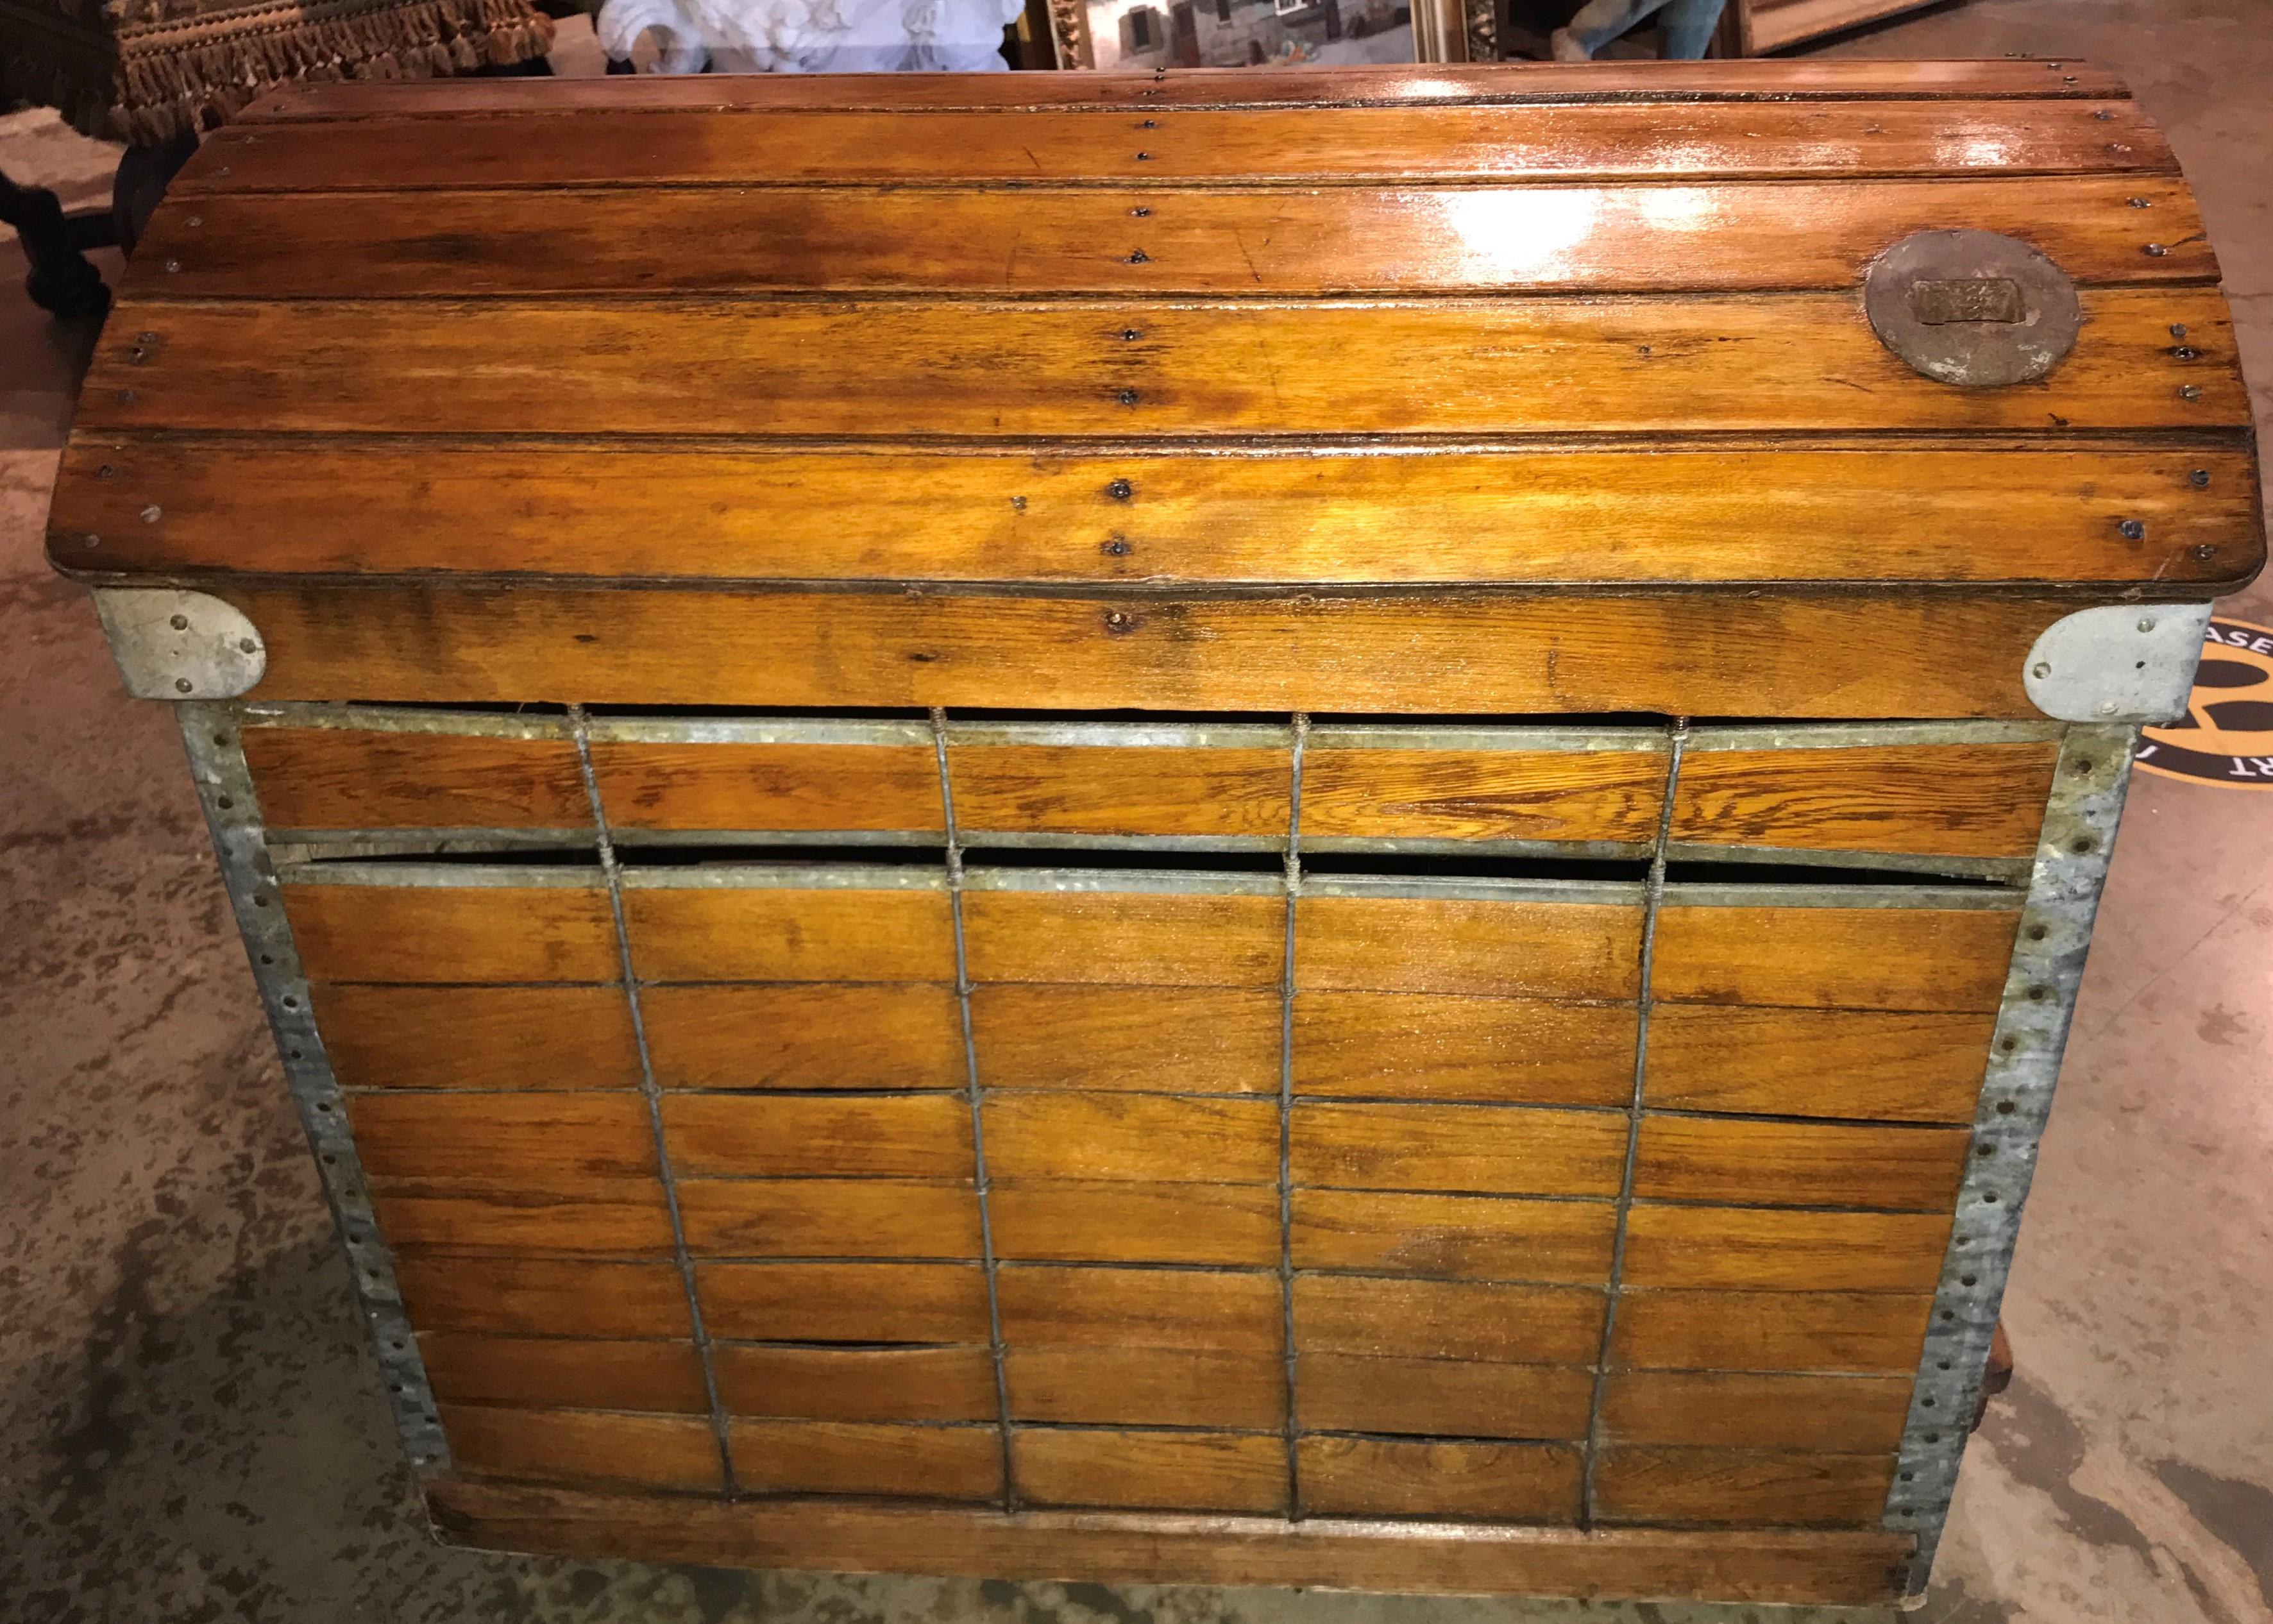 American Antique Wooden Dog Carrier by Absalom Backus, Jr & Sons with Label circa 1902